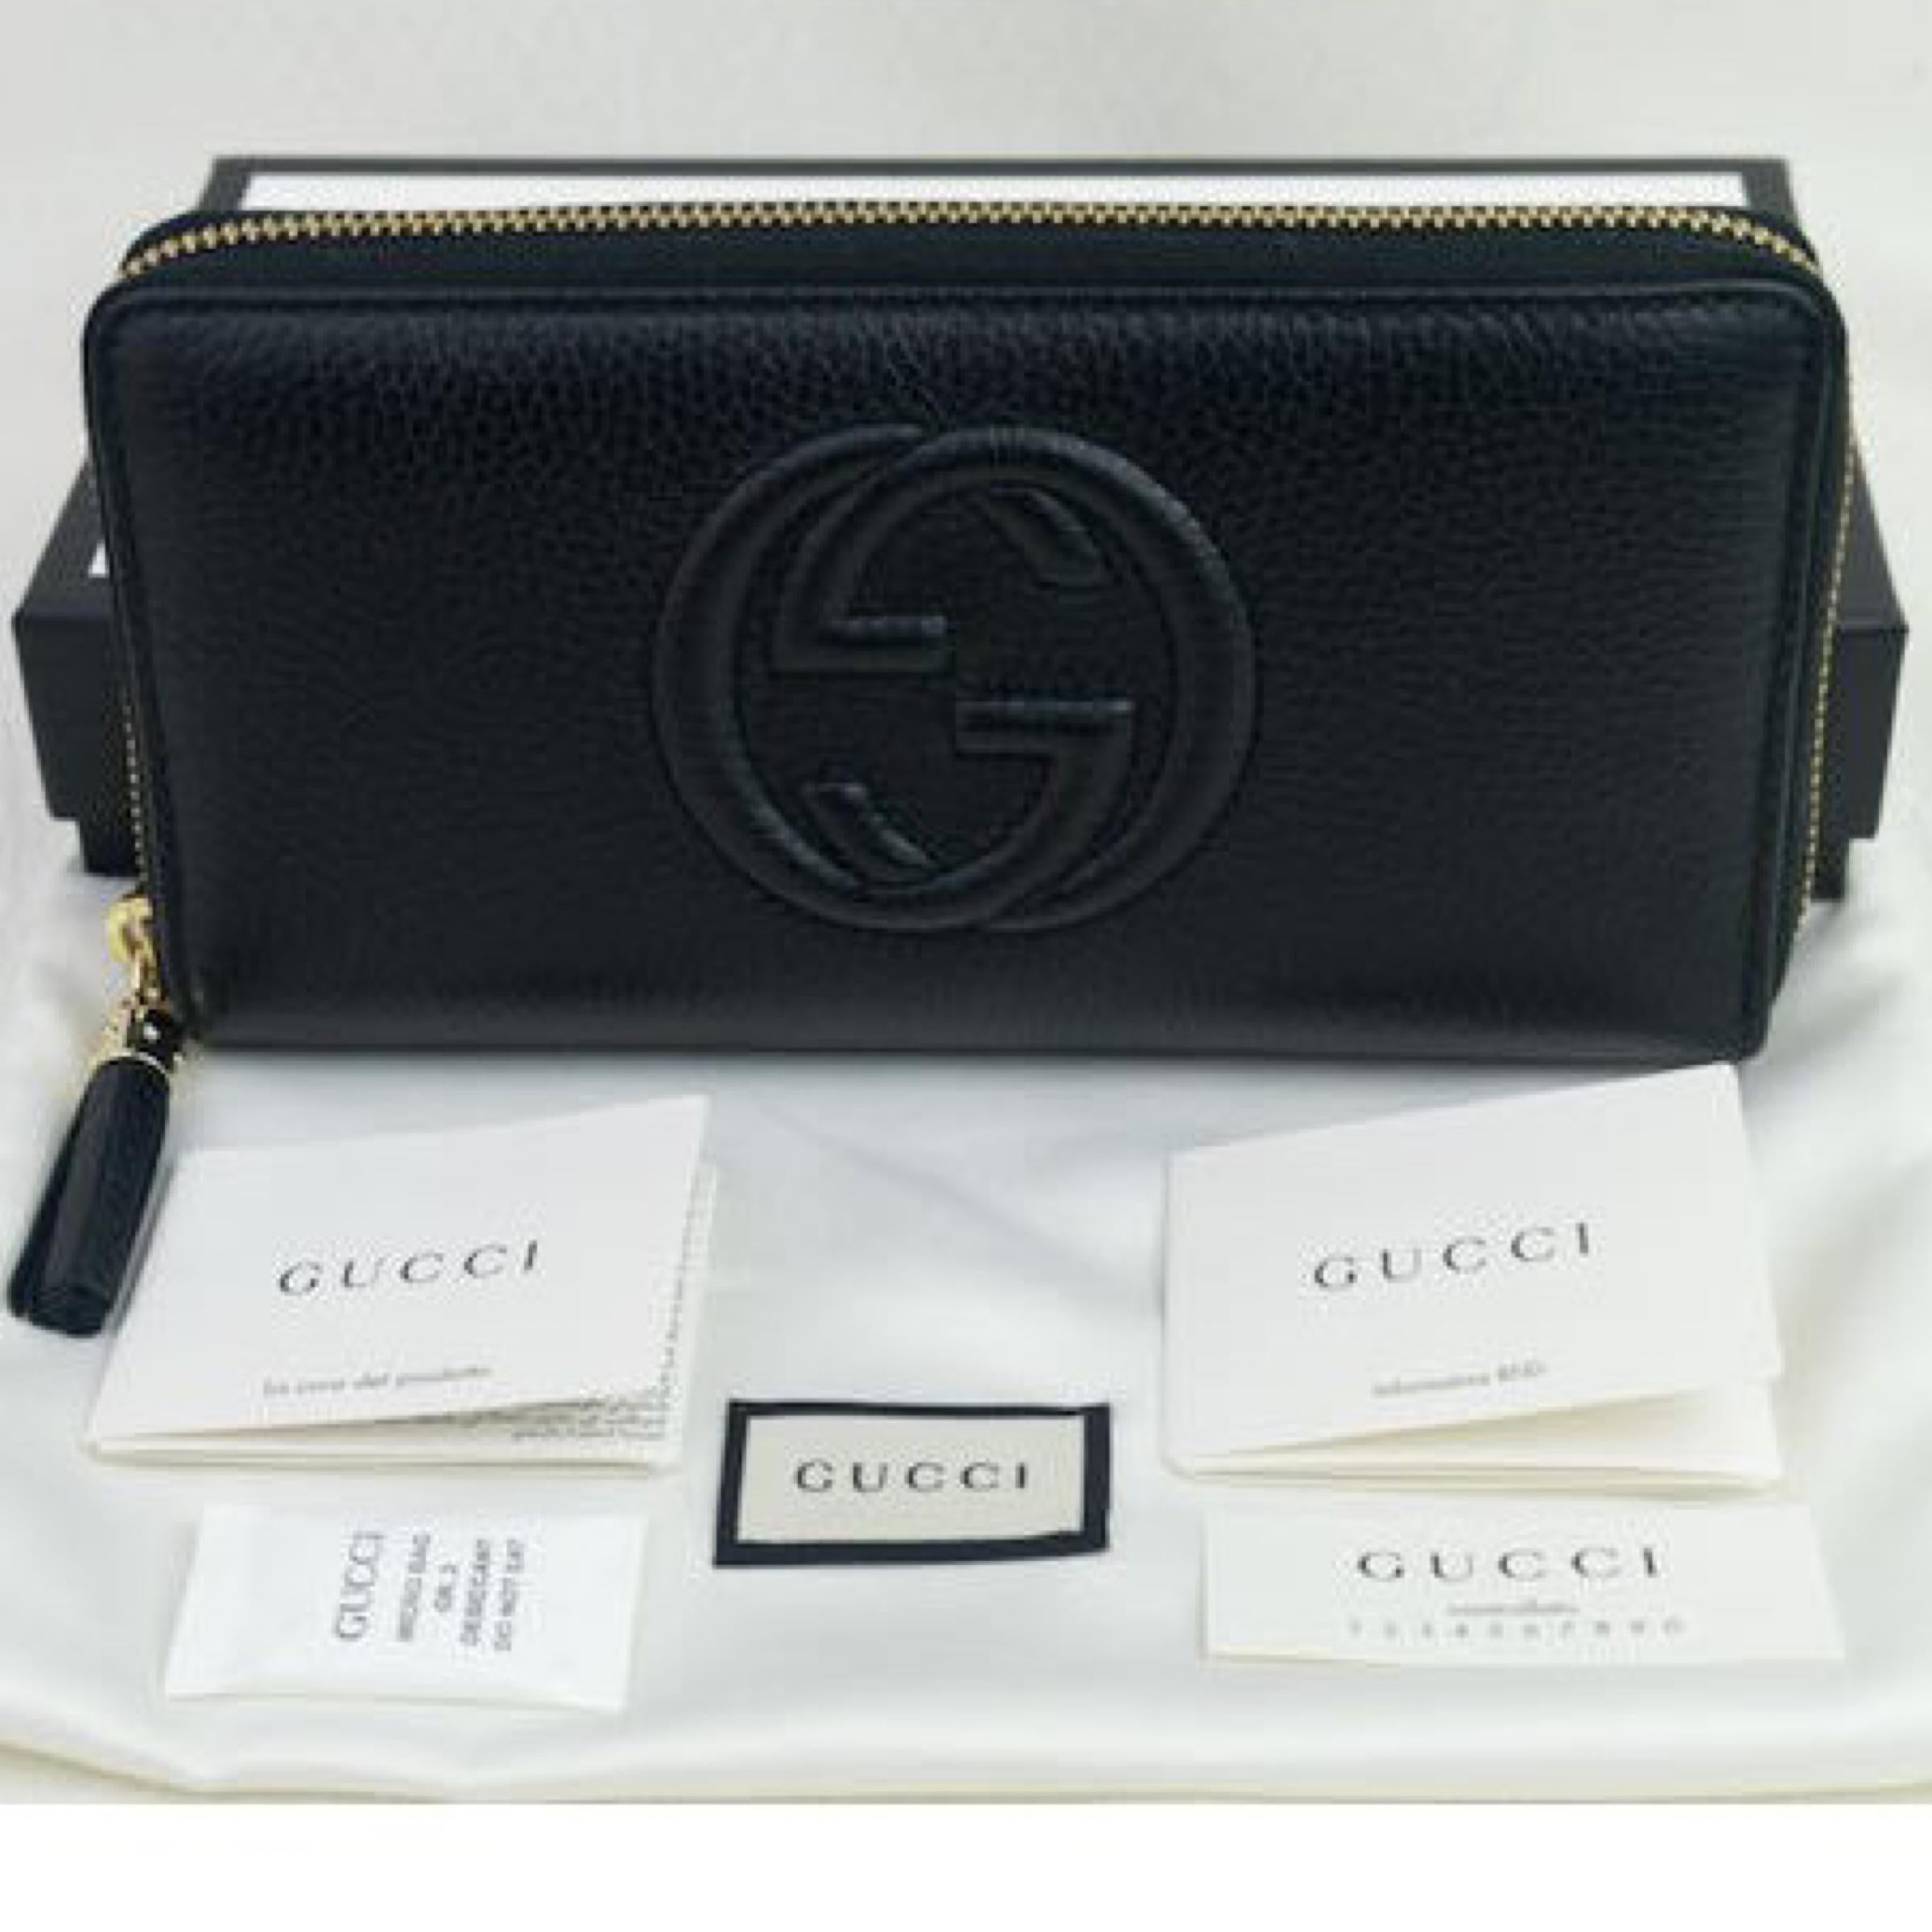 NEW Gucci Soho Black Leather Zip Around Leather Long Wallet Clutch Bag For Sale 7